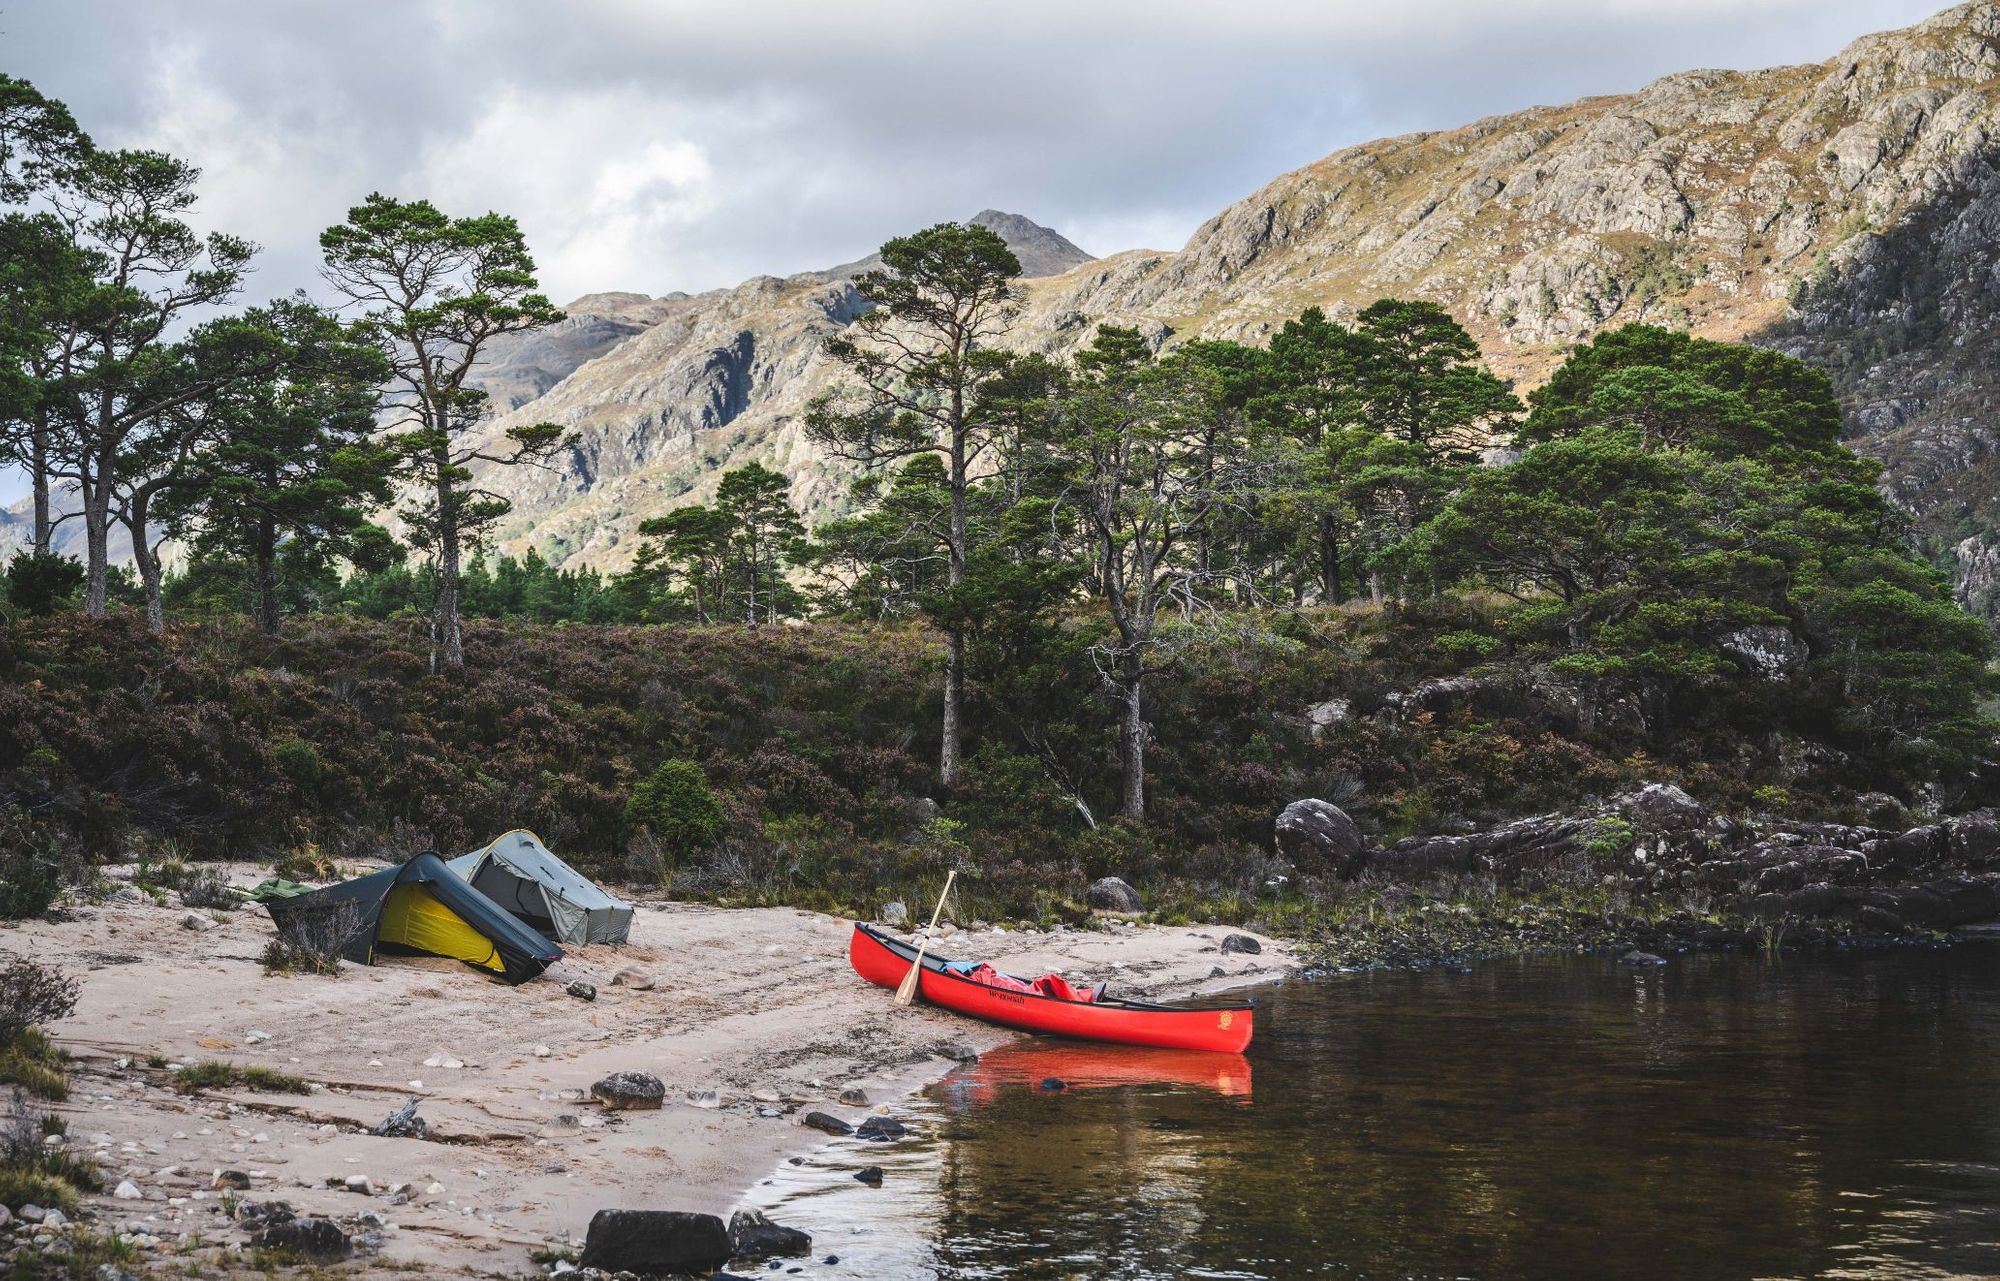 A stunning camping spot on an island in Loch Maree in Wester Ross in the Northwest Highlands of Scotland. Photo: Ian Finch